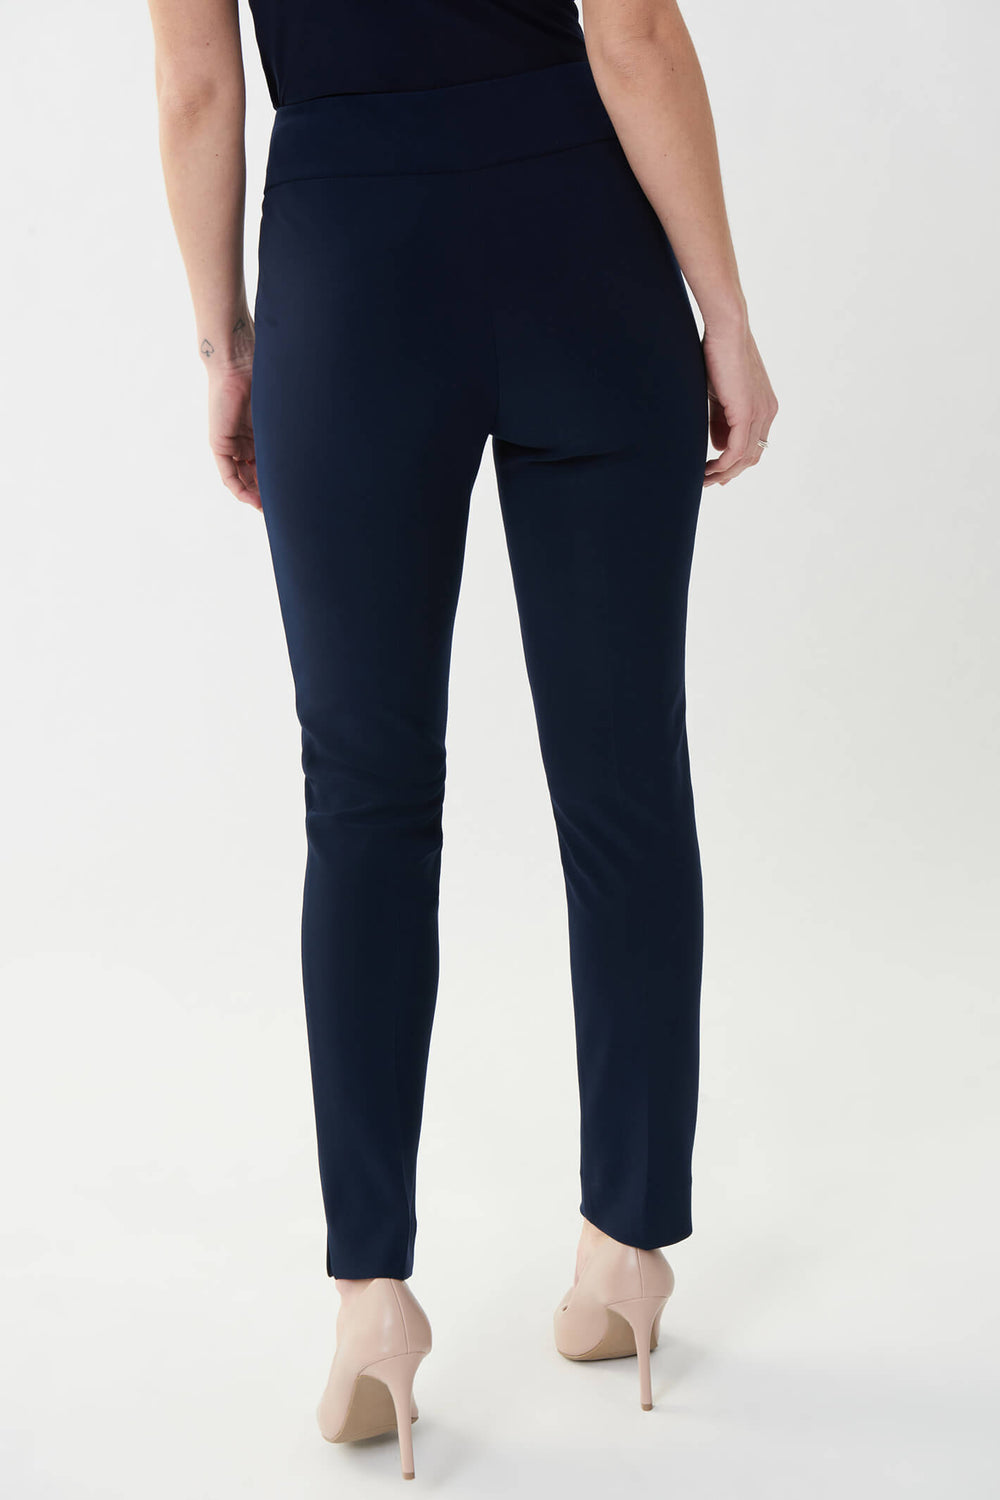 Joseph Ribkoff 144092S Navy Pull-On Trousers - Experience Boutique